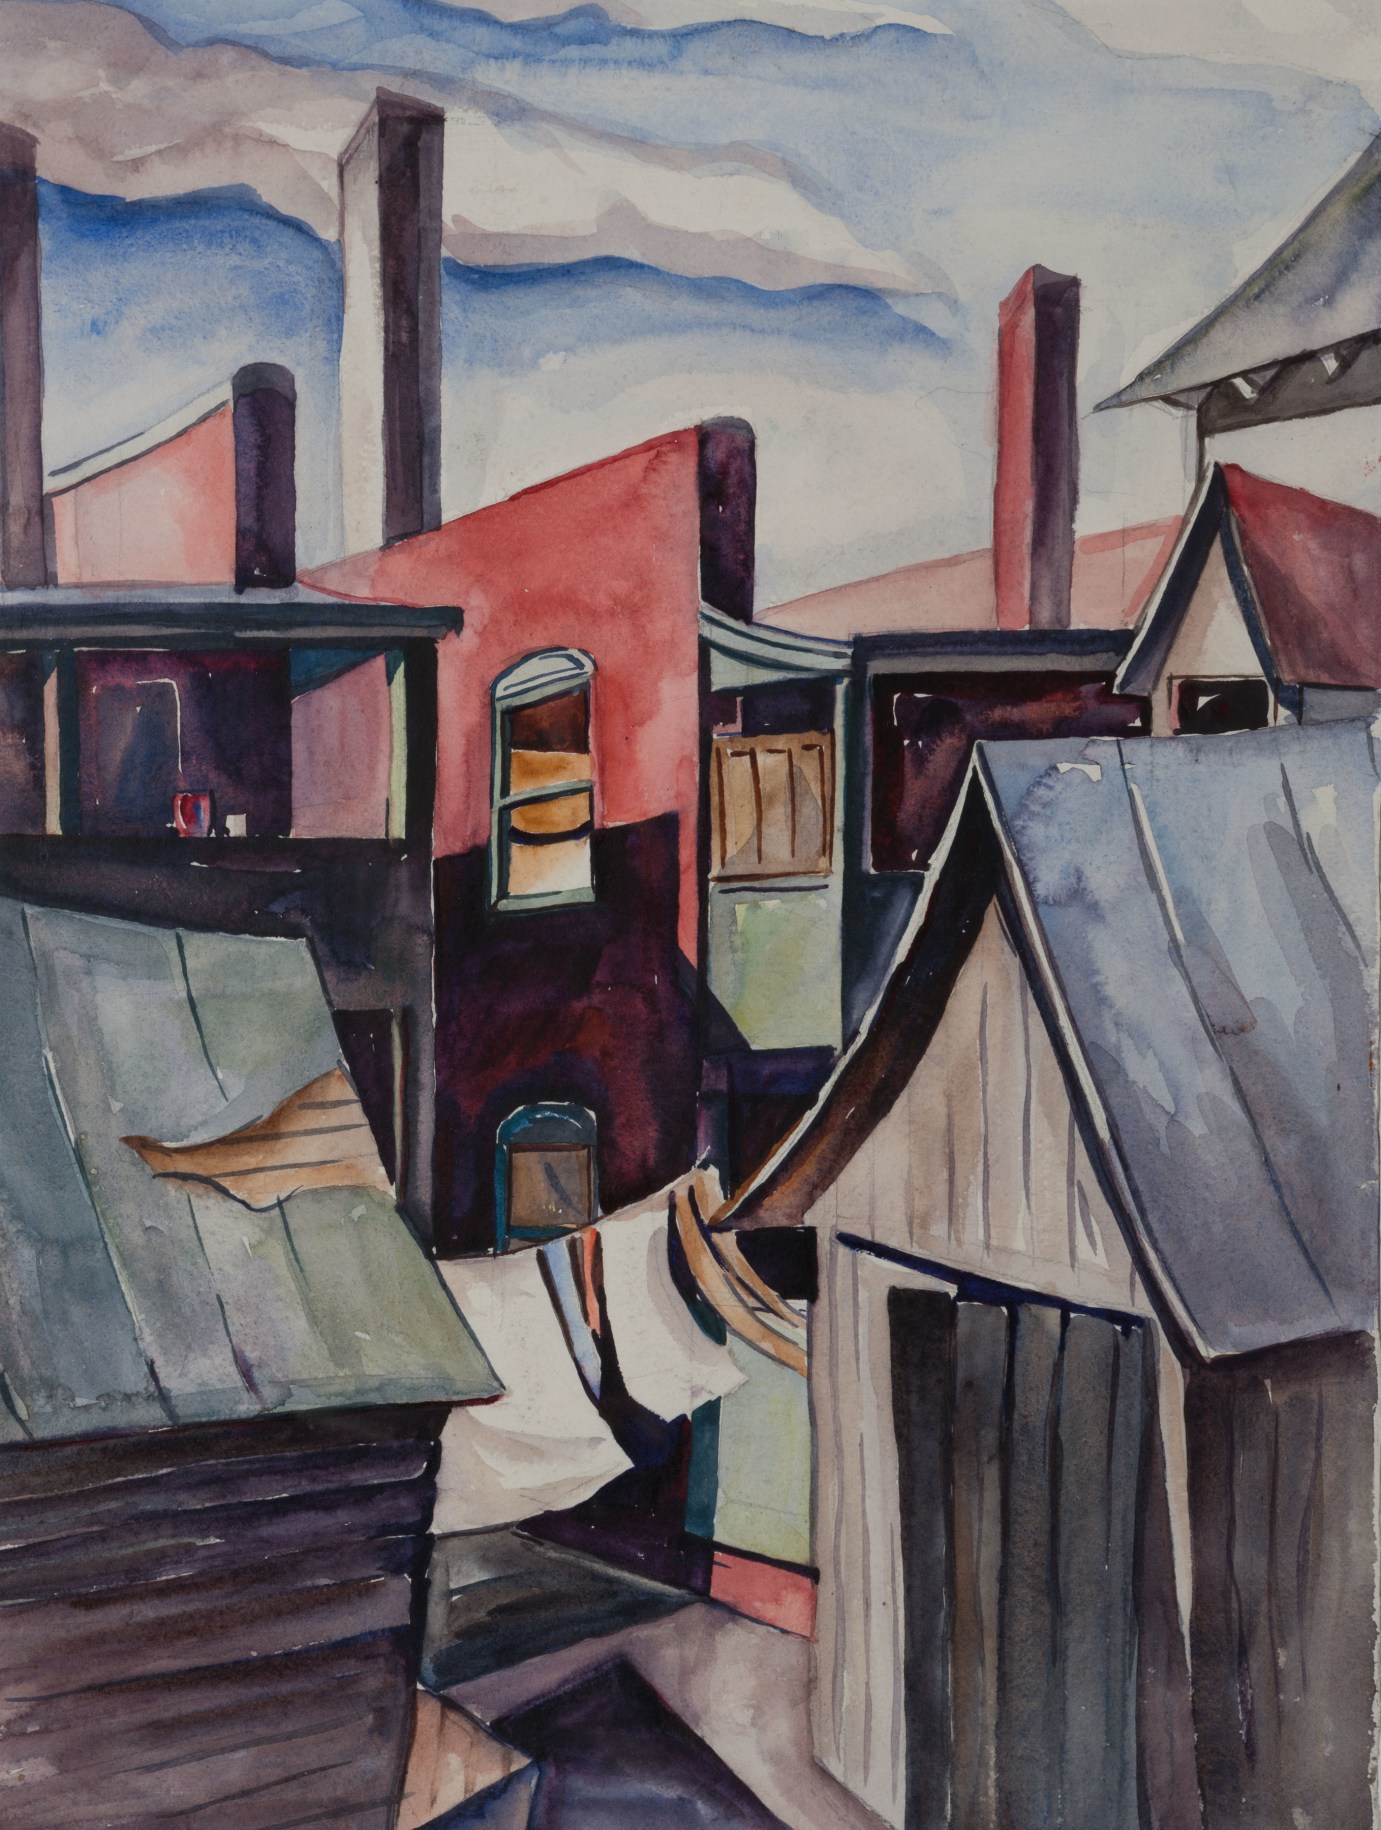 Watercolor of shacks and apartment buildings crowded together. A line of laundry drying can be seen in the lower central part of the image.